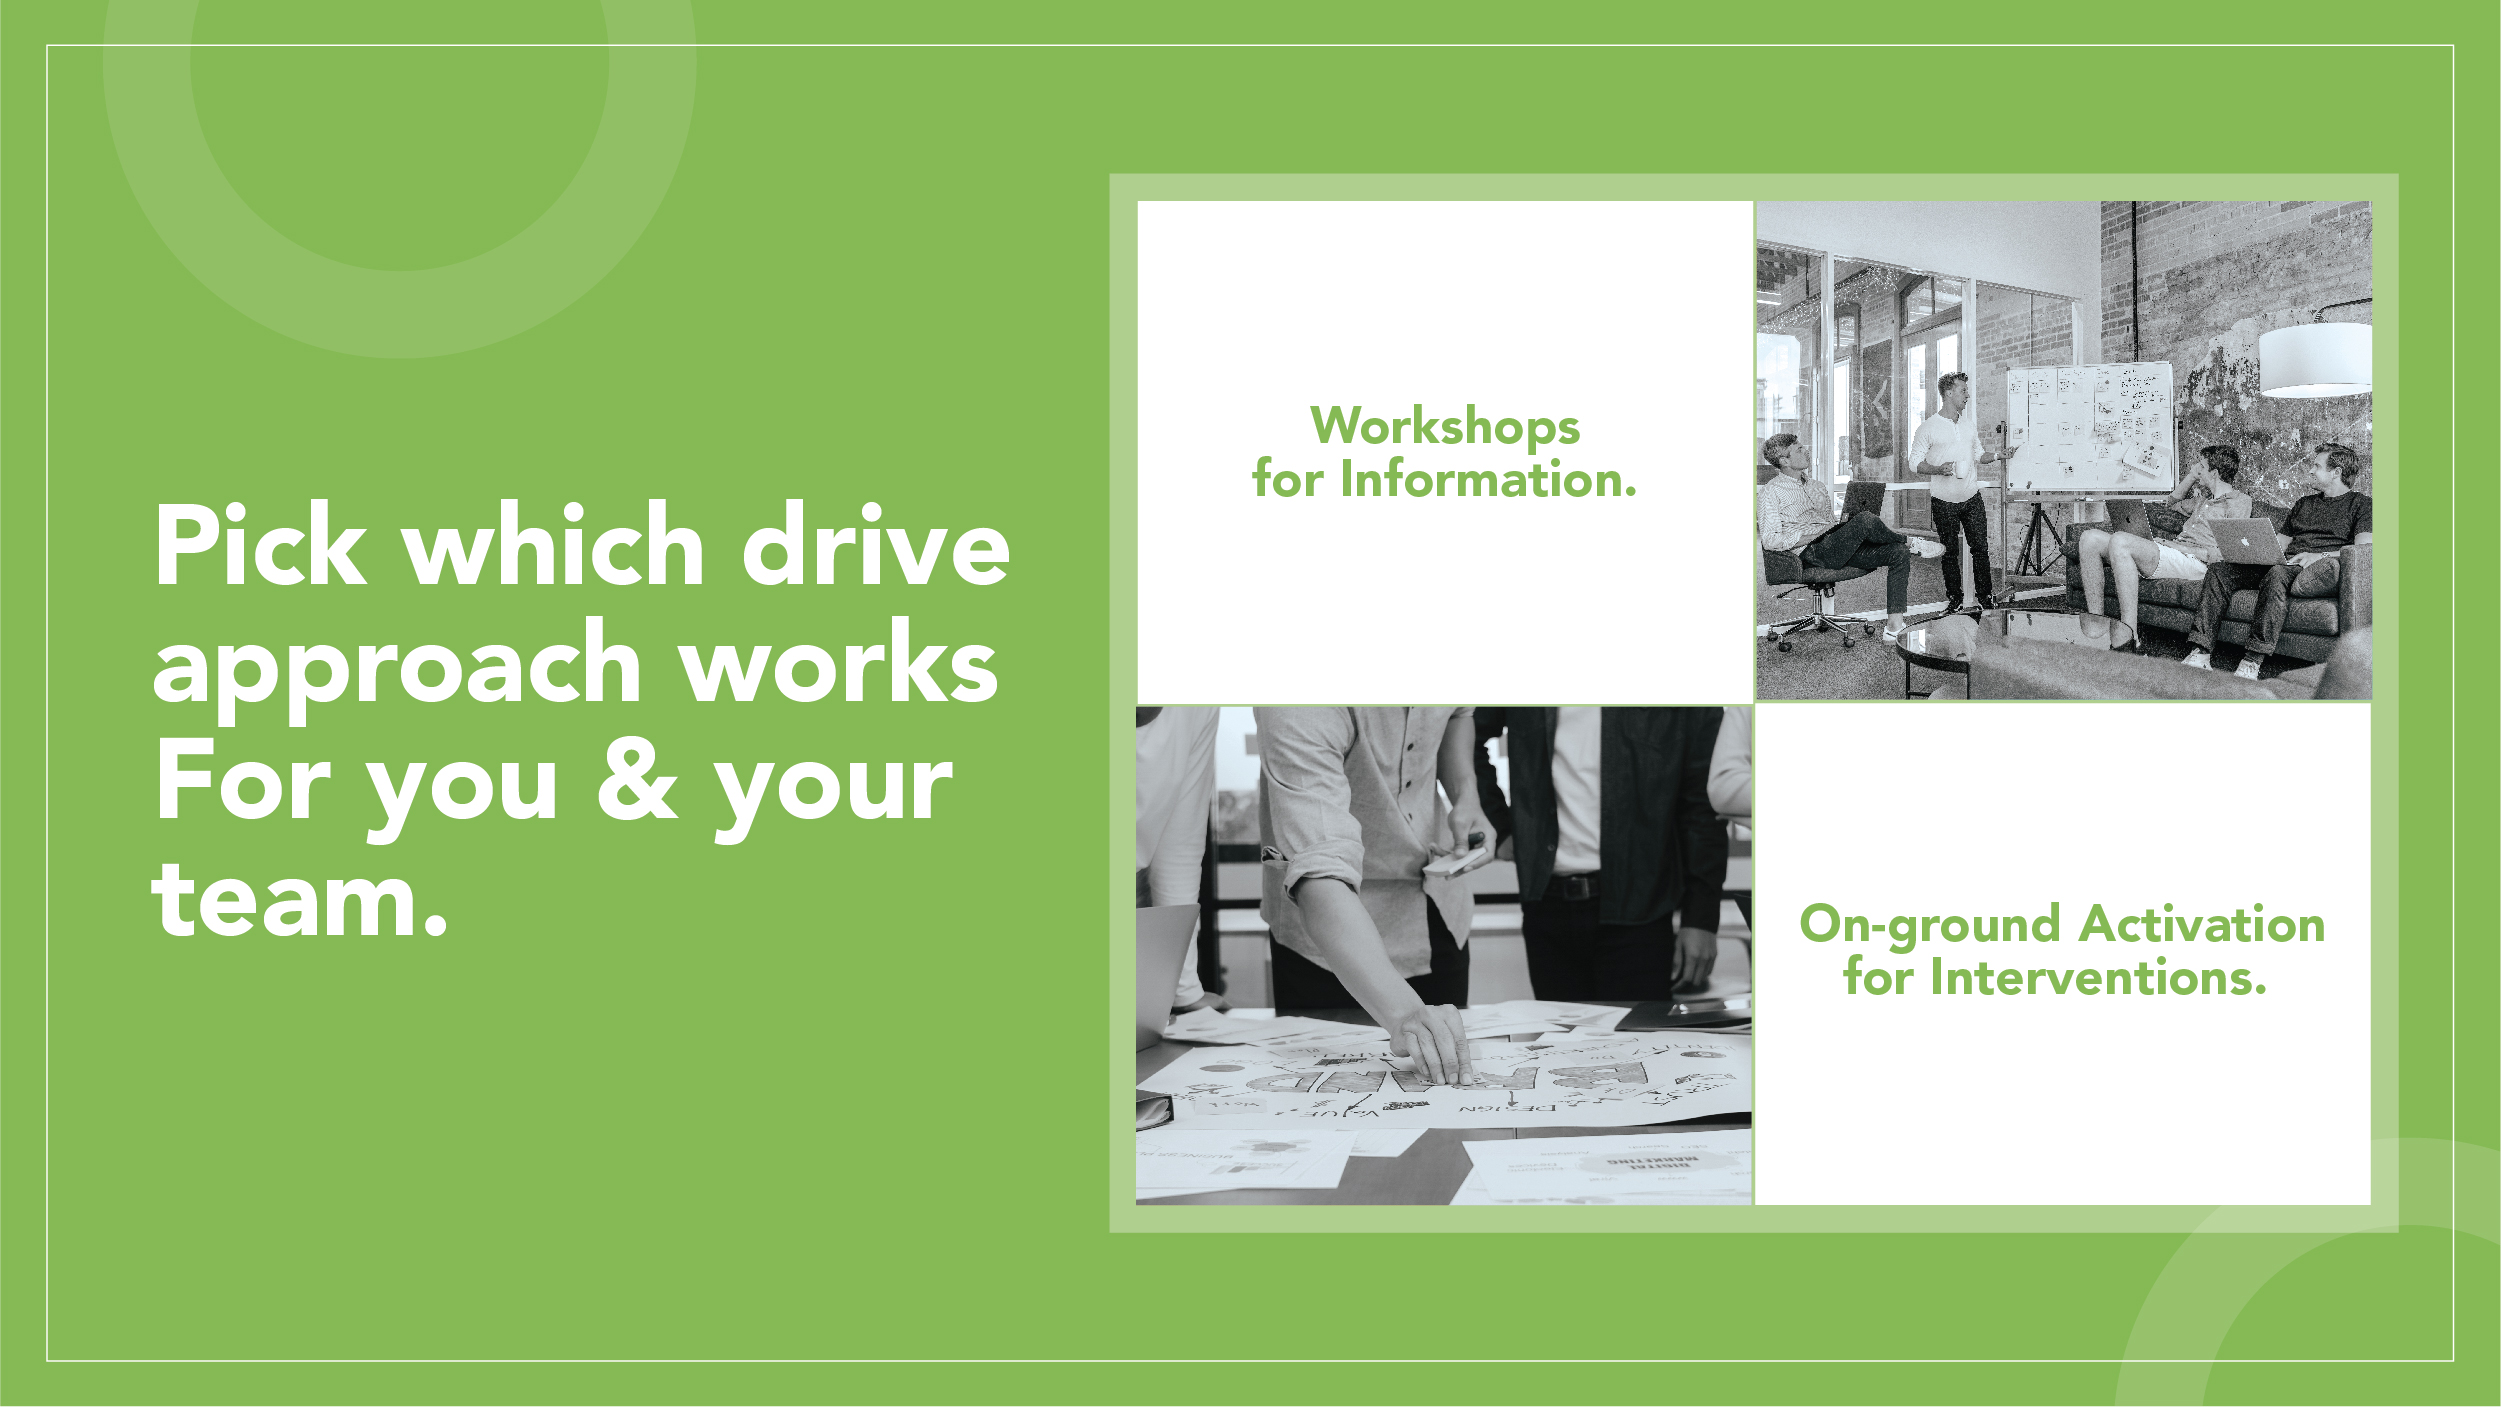 Pick which Drive approach works for you & your team